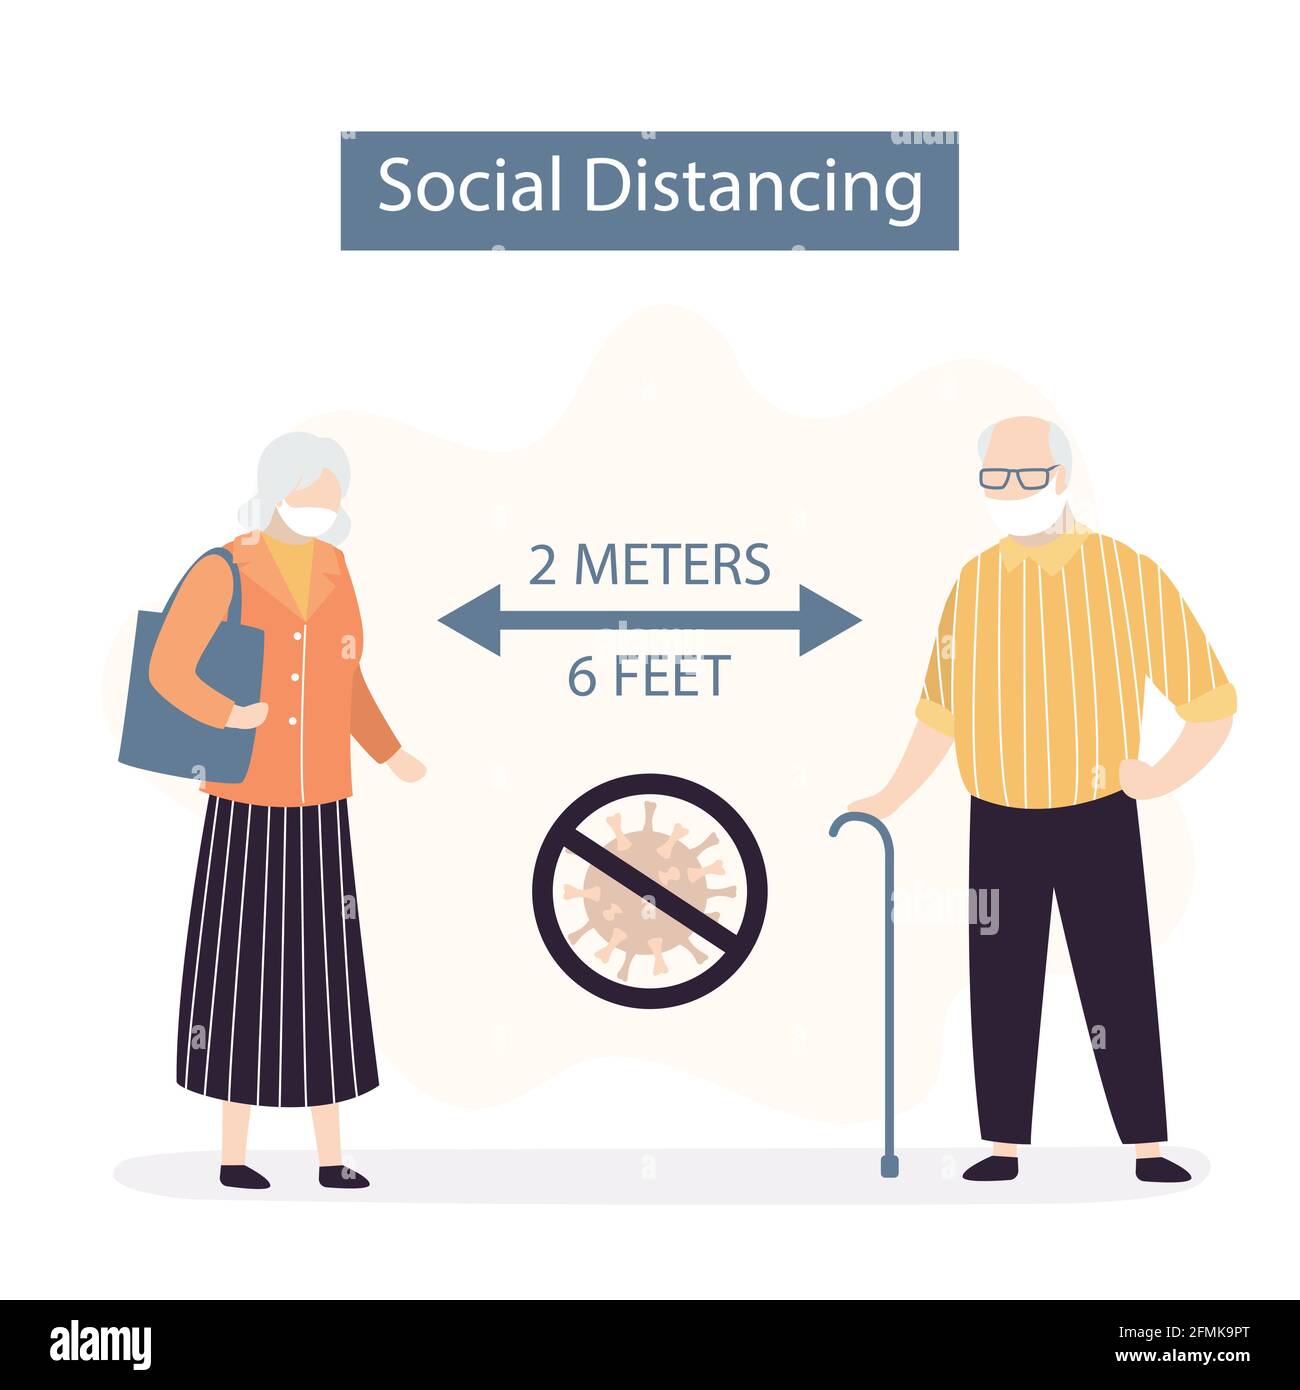 Social Distancing, two old people keeping distance for infection risk and disease. 2 meters or 6 feet distance between humans. Covid-19 prevention ban Stock Vector